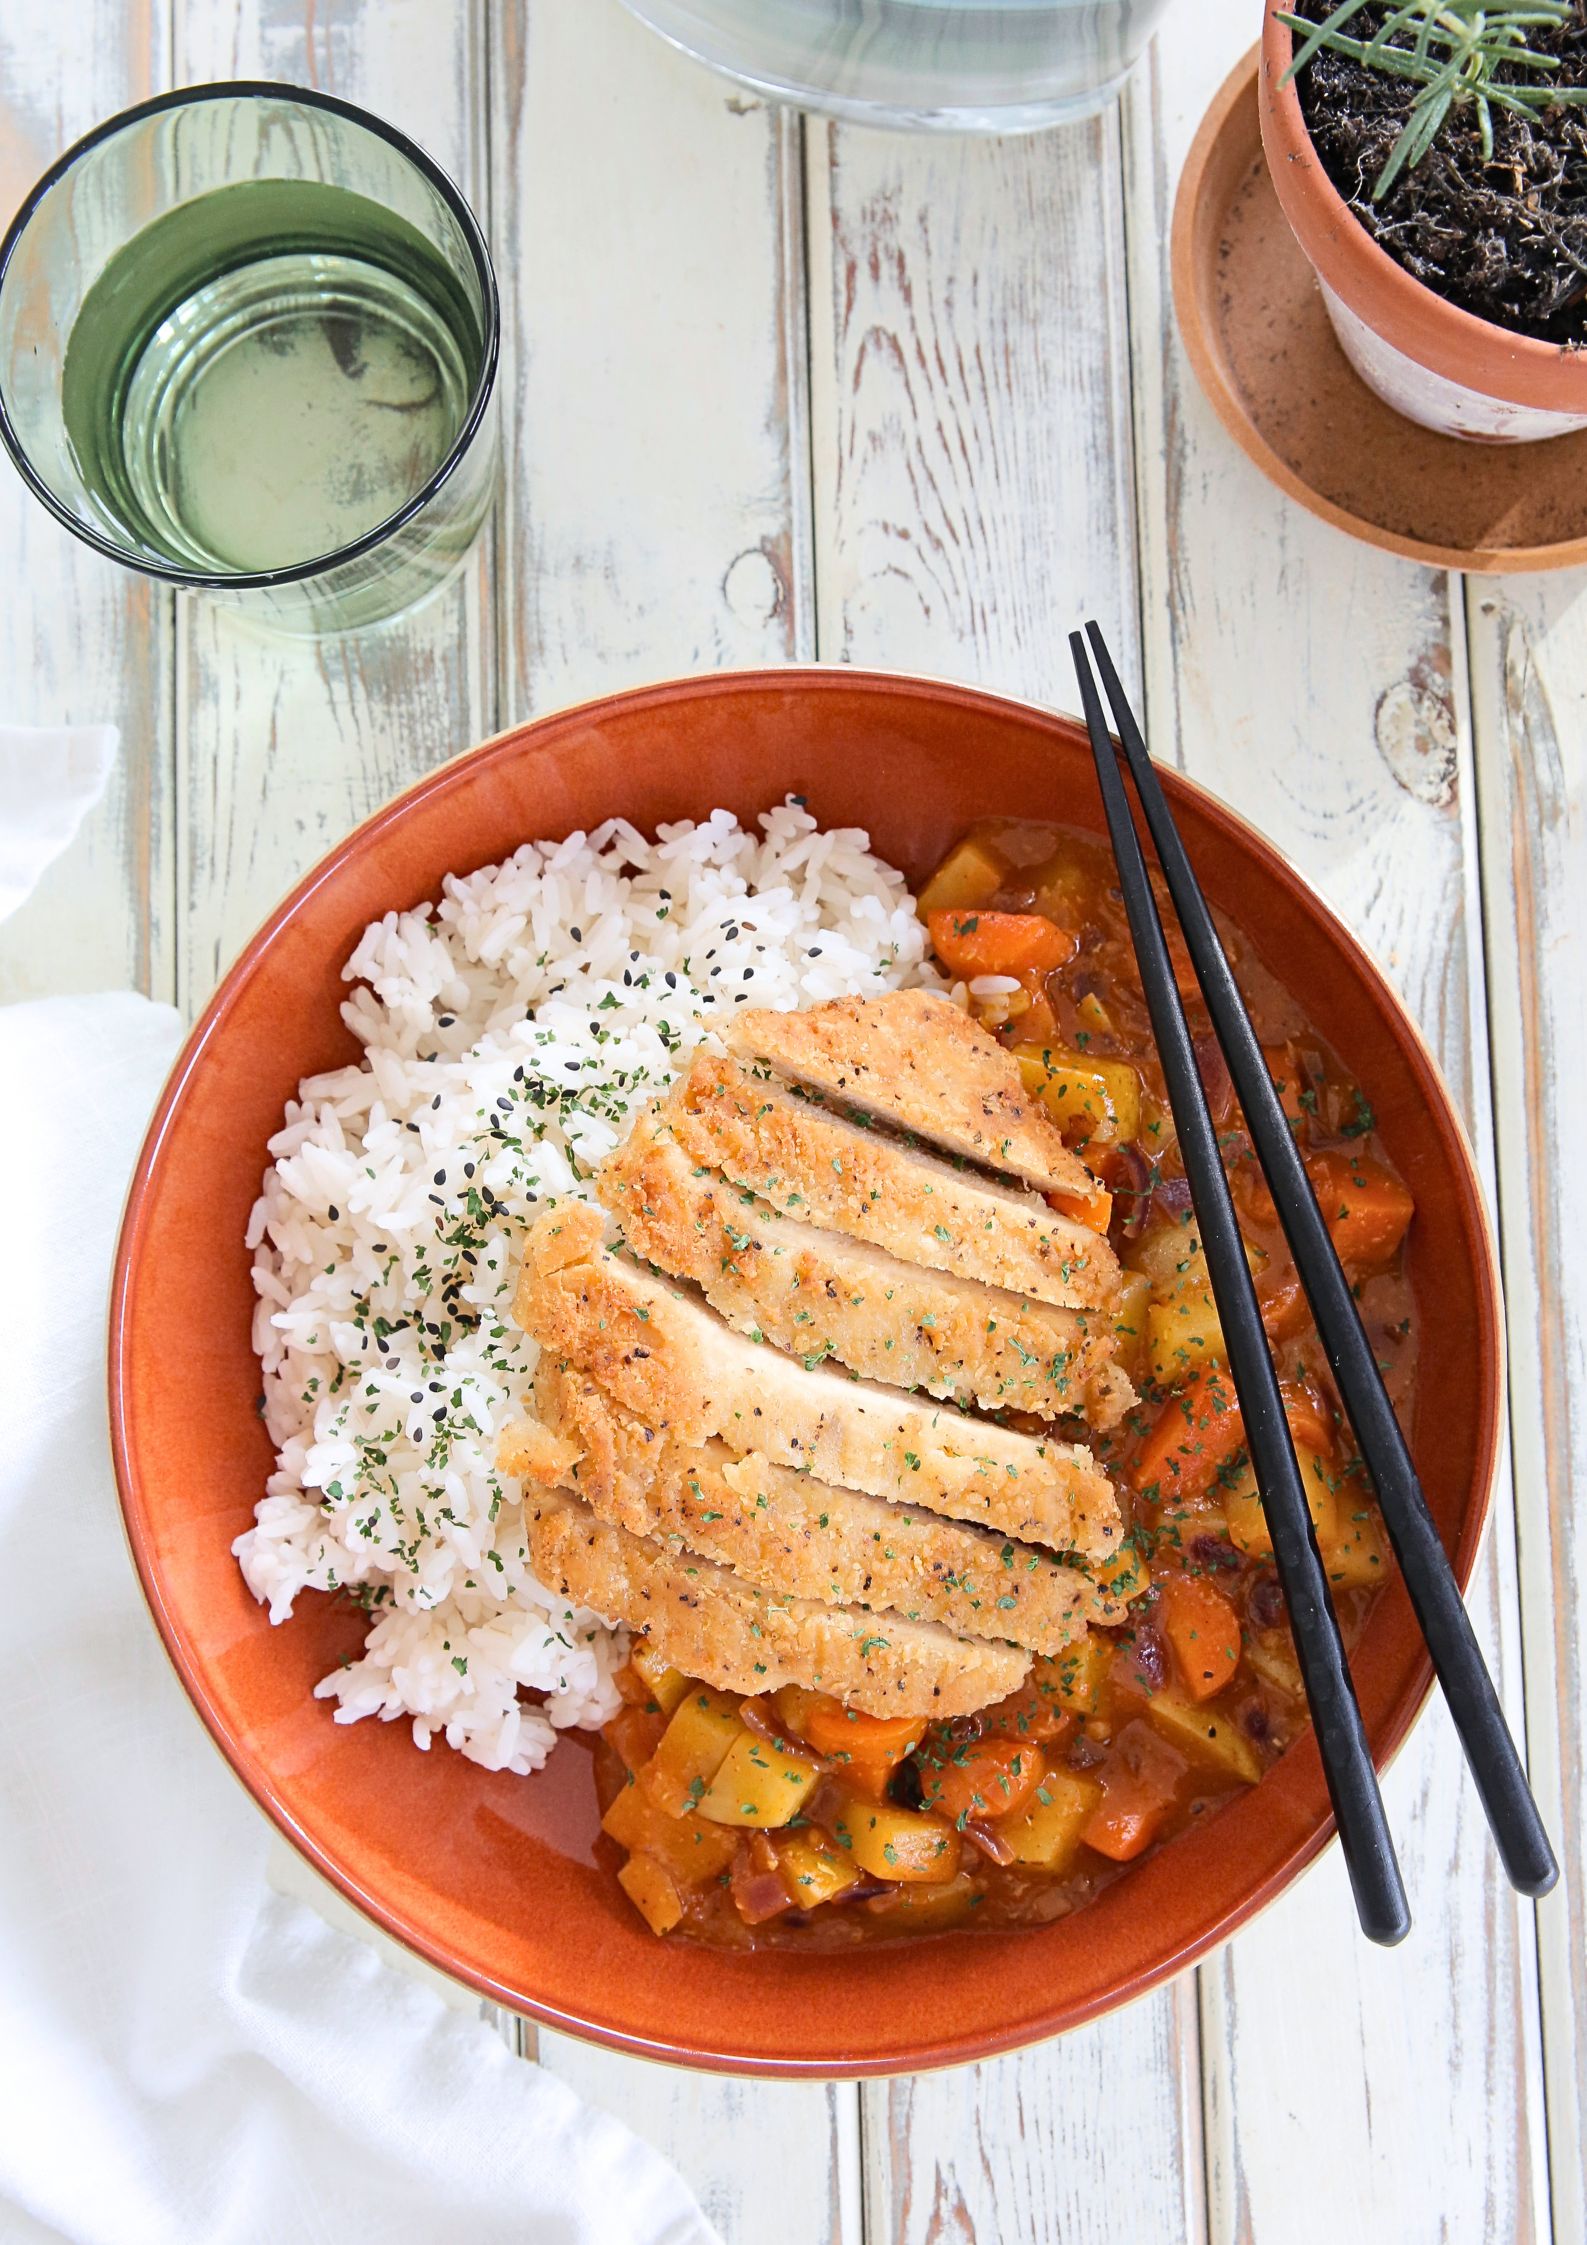 This homemade vegan chicken katsu curry is so tasty and easy to make! It's a very popular Japanese restaurant dish of crisp fried 'chicken' with a simple but punchy Japanese curry sauce. And it's all ready in around 30 minutes! Recipe on thecookandhim.com | #katsu #katsucurry #veganchicken #veganmeals #vegancurry